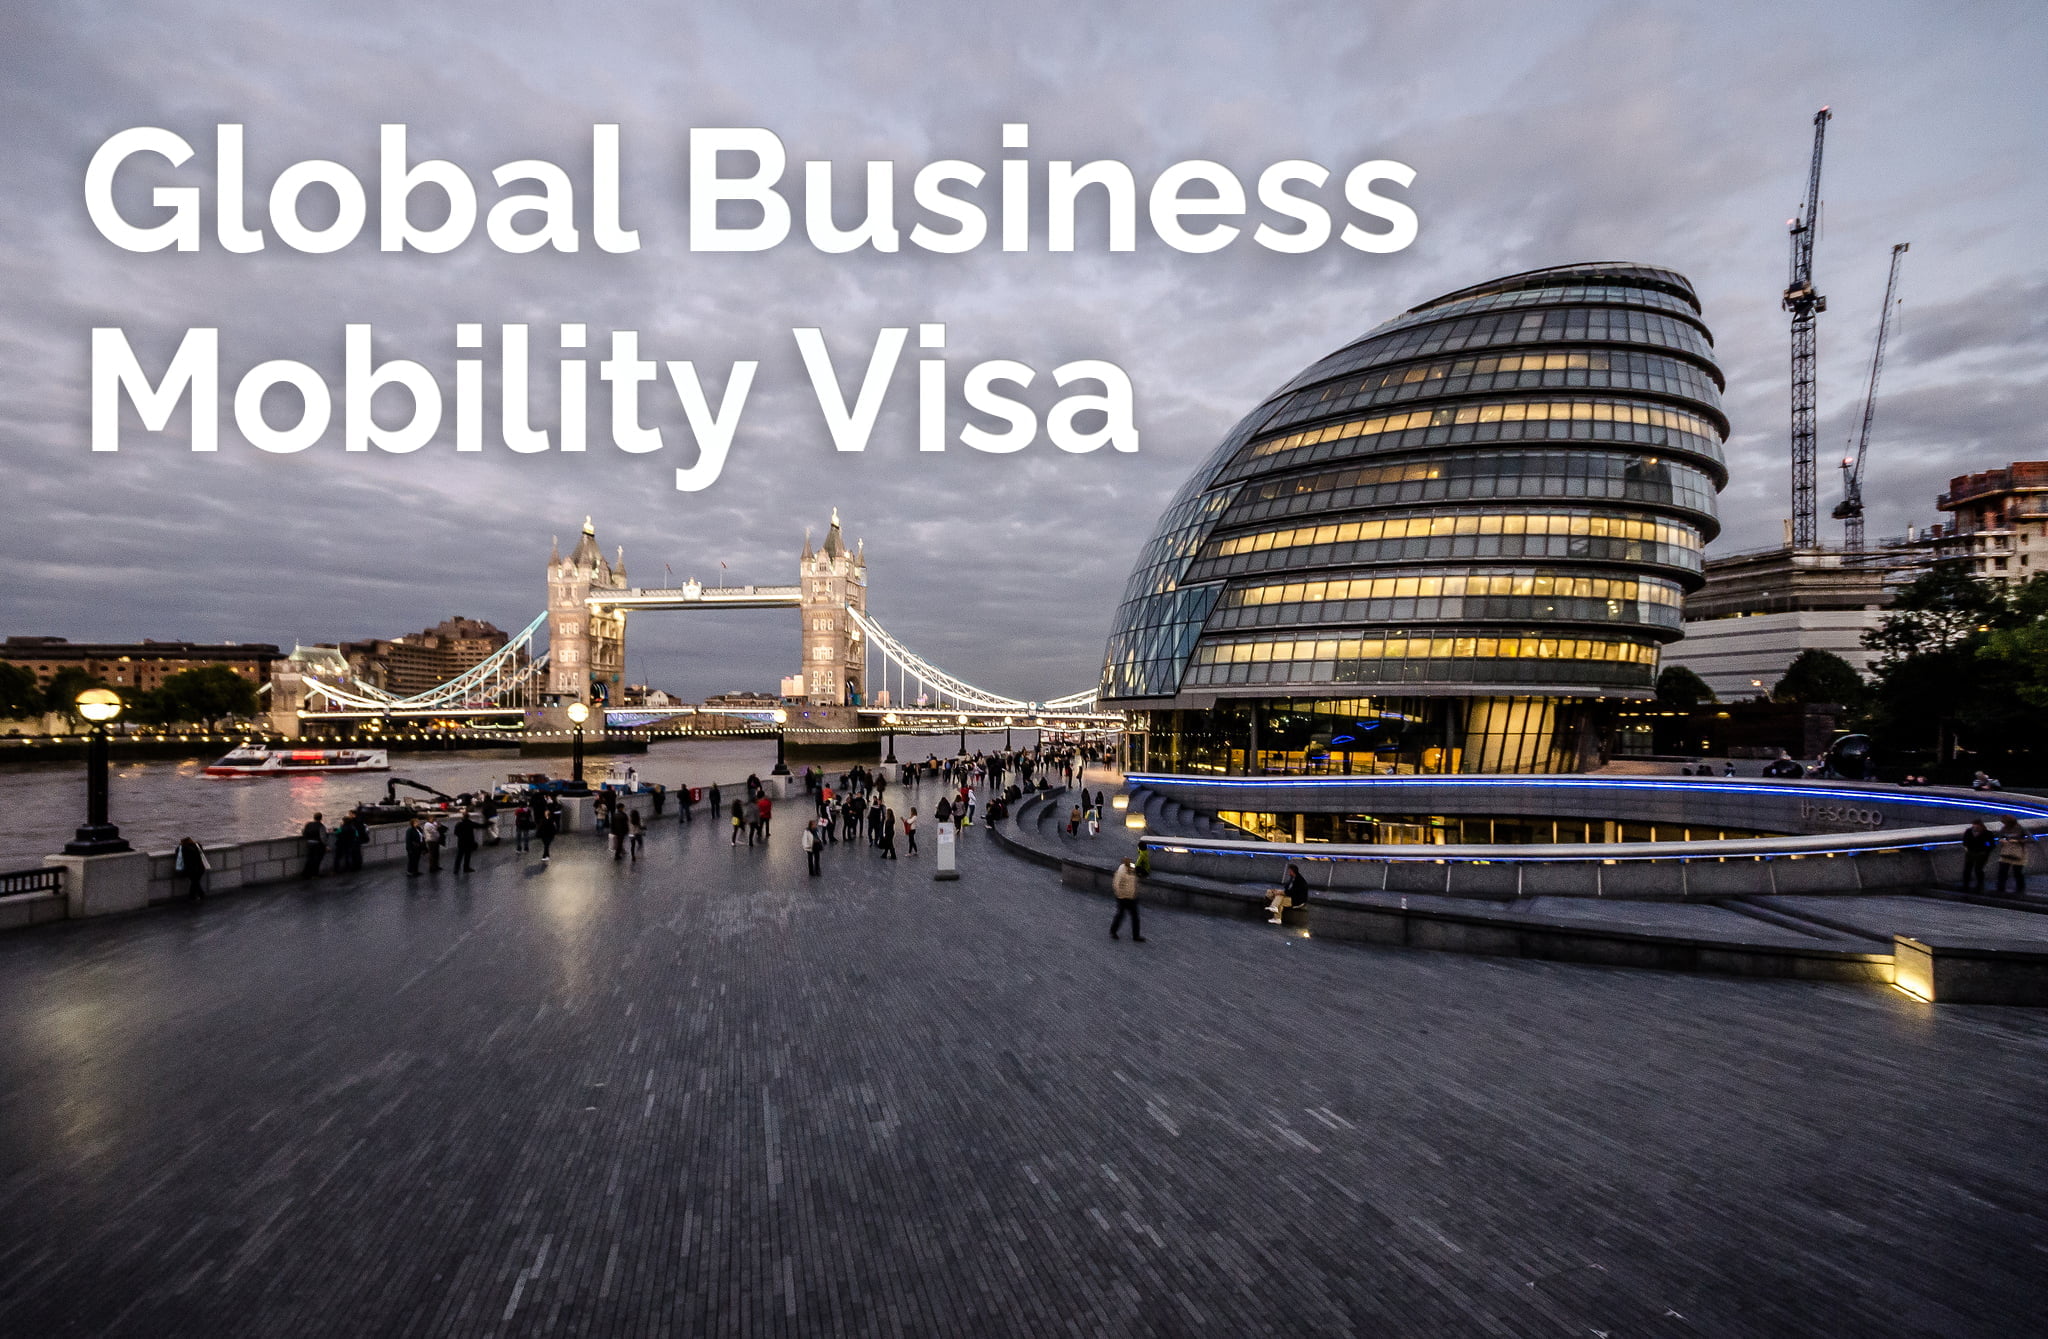 Global Business Mobility Visas Make It Easier For International Organisations To Send Workers Into The UK